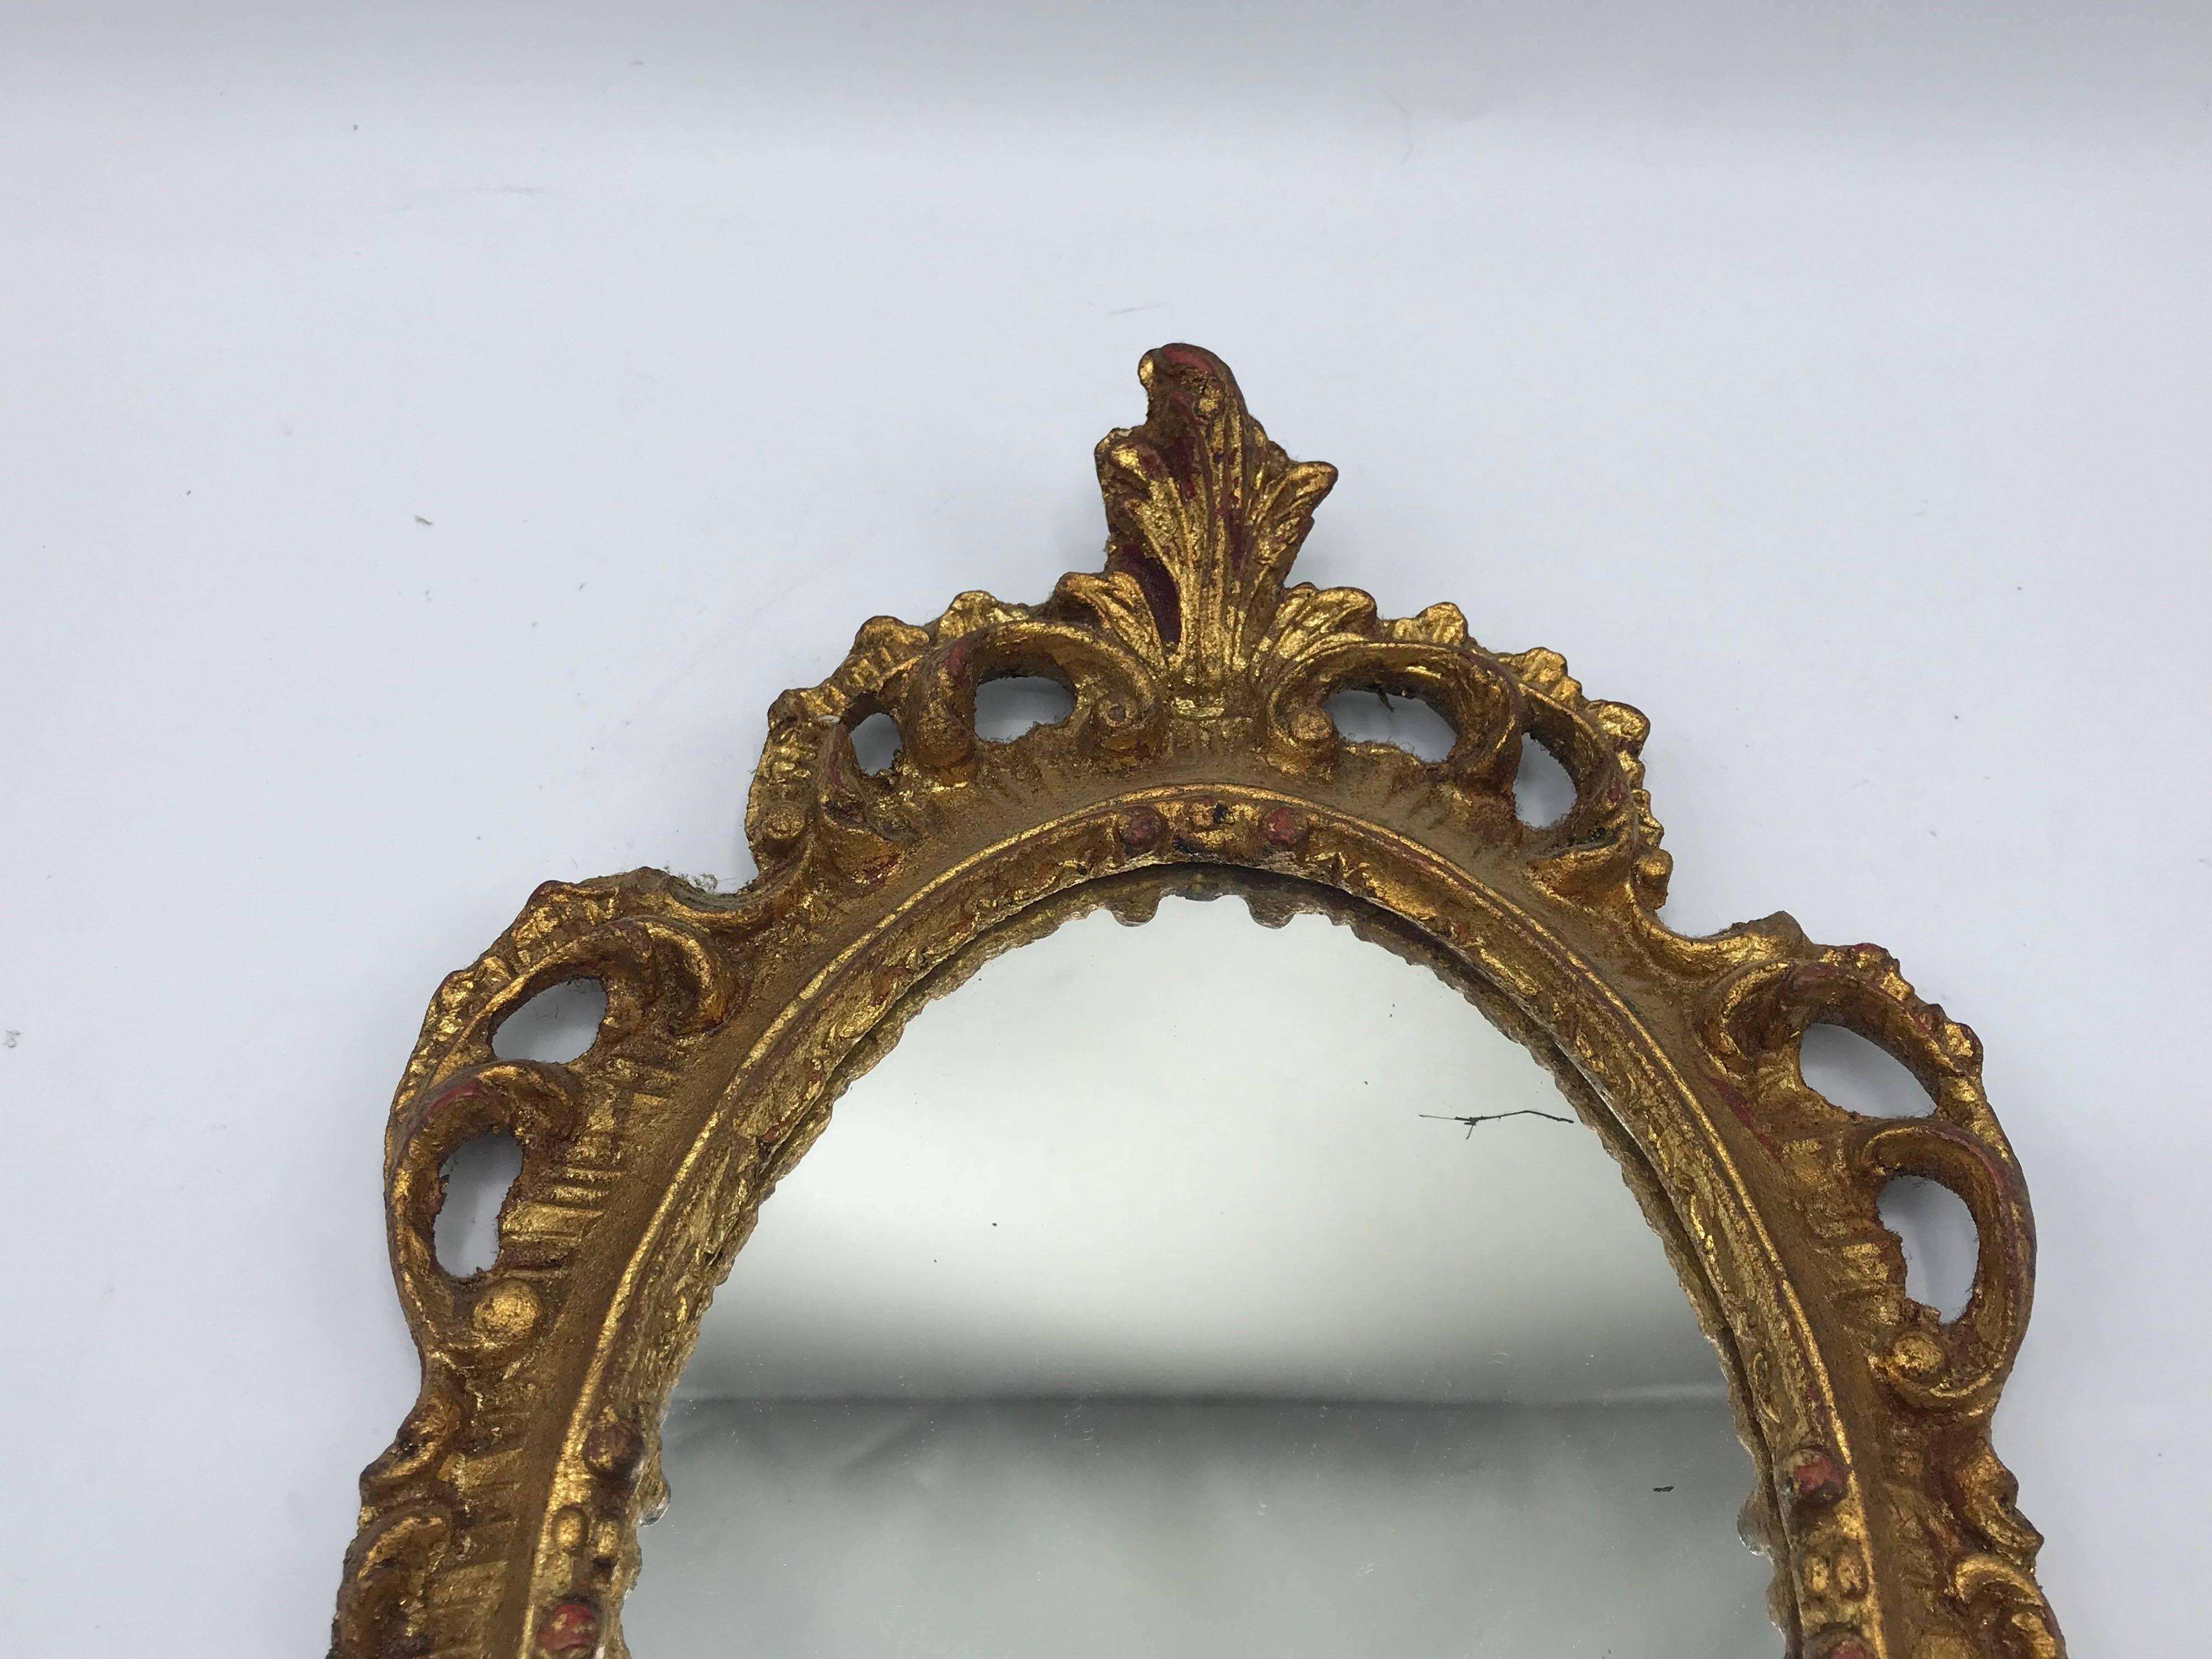 Offered is a fabulous, small/medium 1960s Italian Florentine oval gilded mirror. Beautiful, ornate carved details.